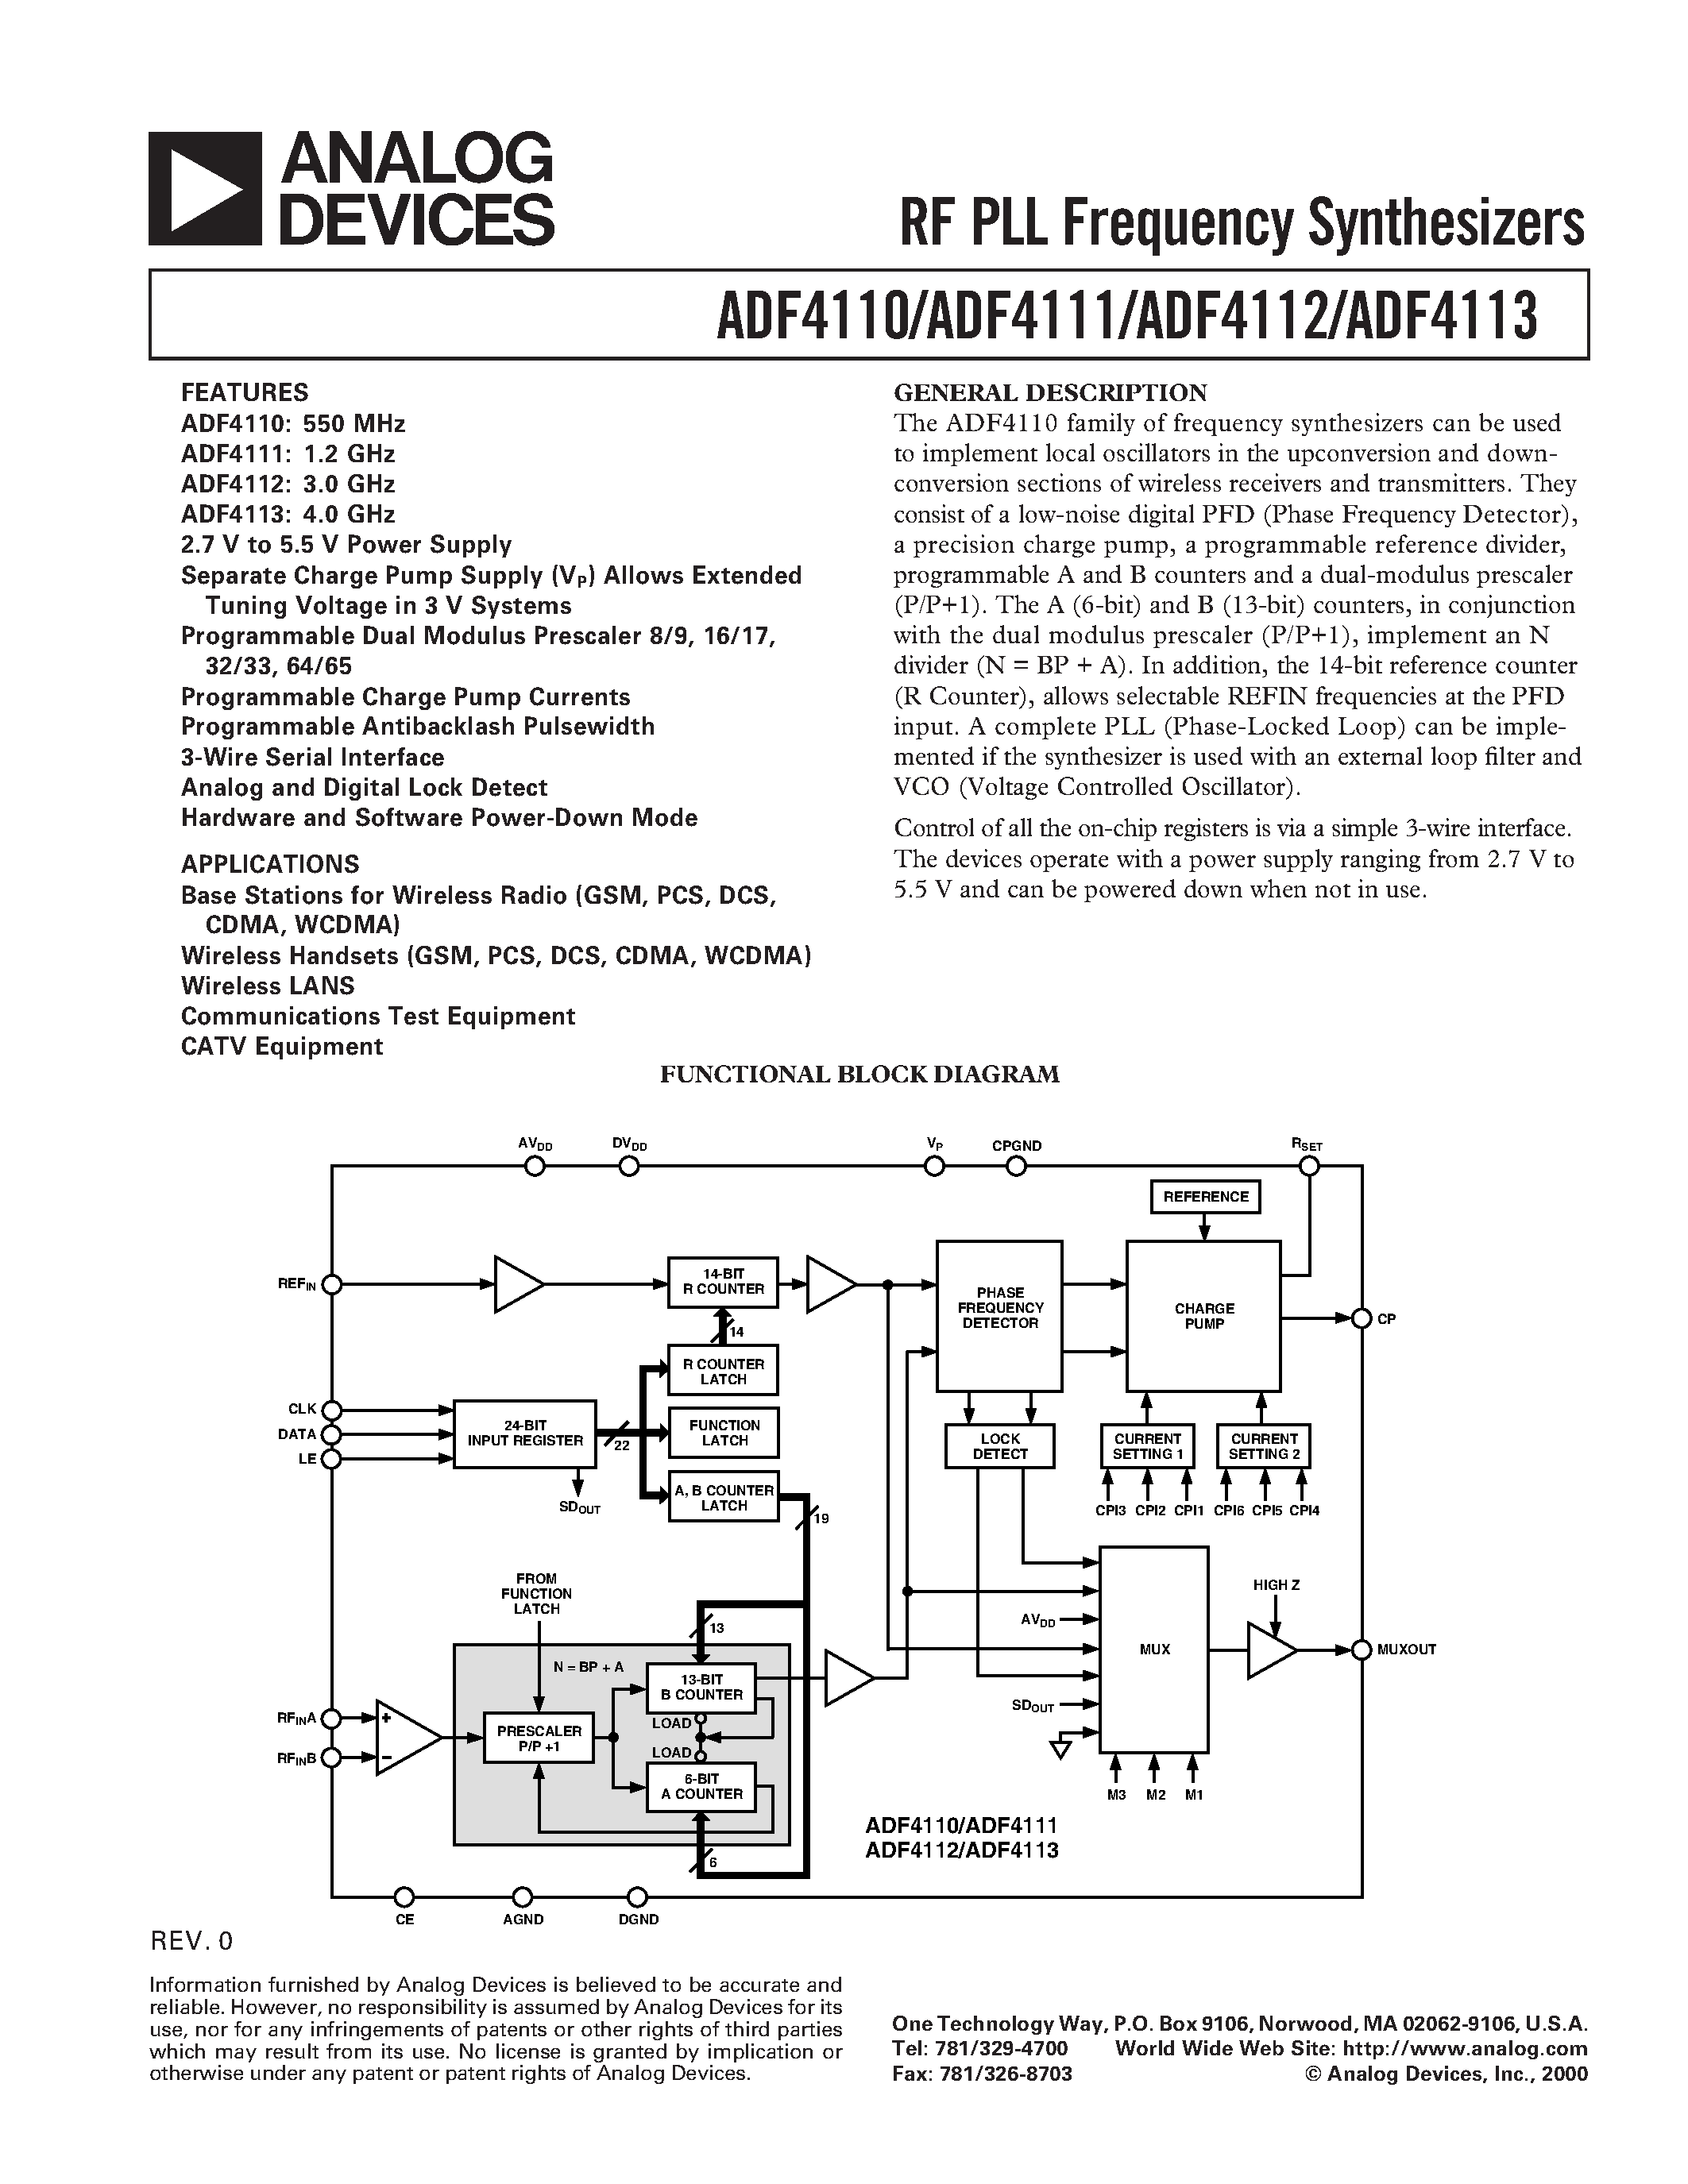 Даташит ADF4113 - RF PLL Frequency Synthesizers страница 1